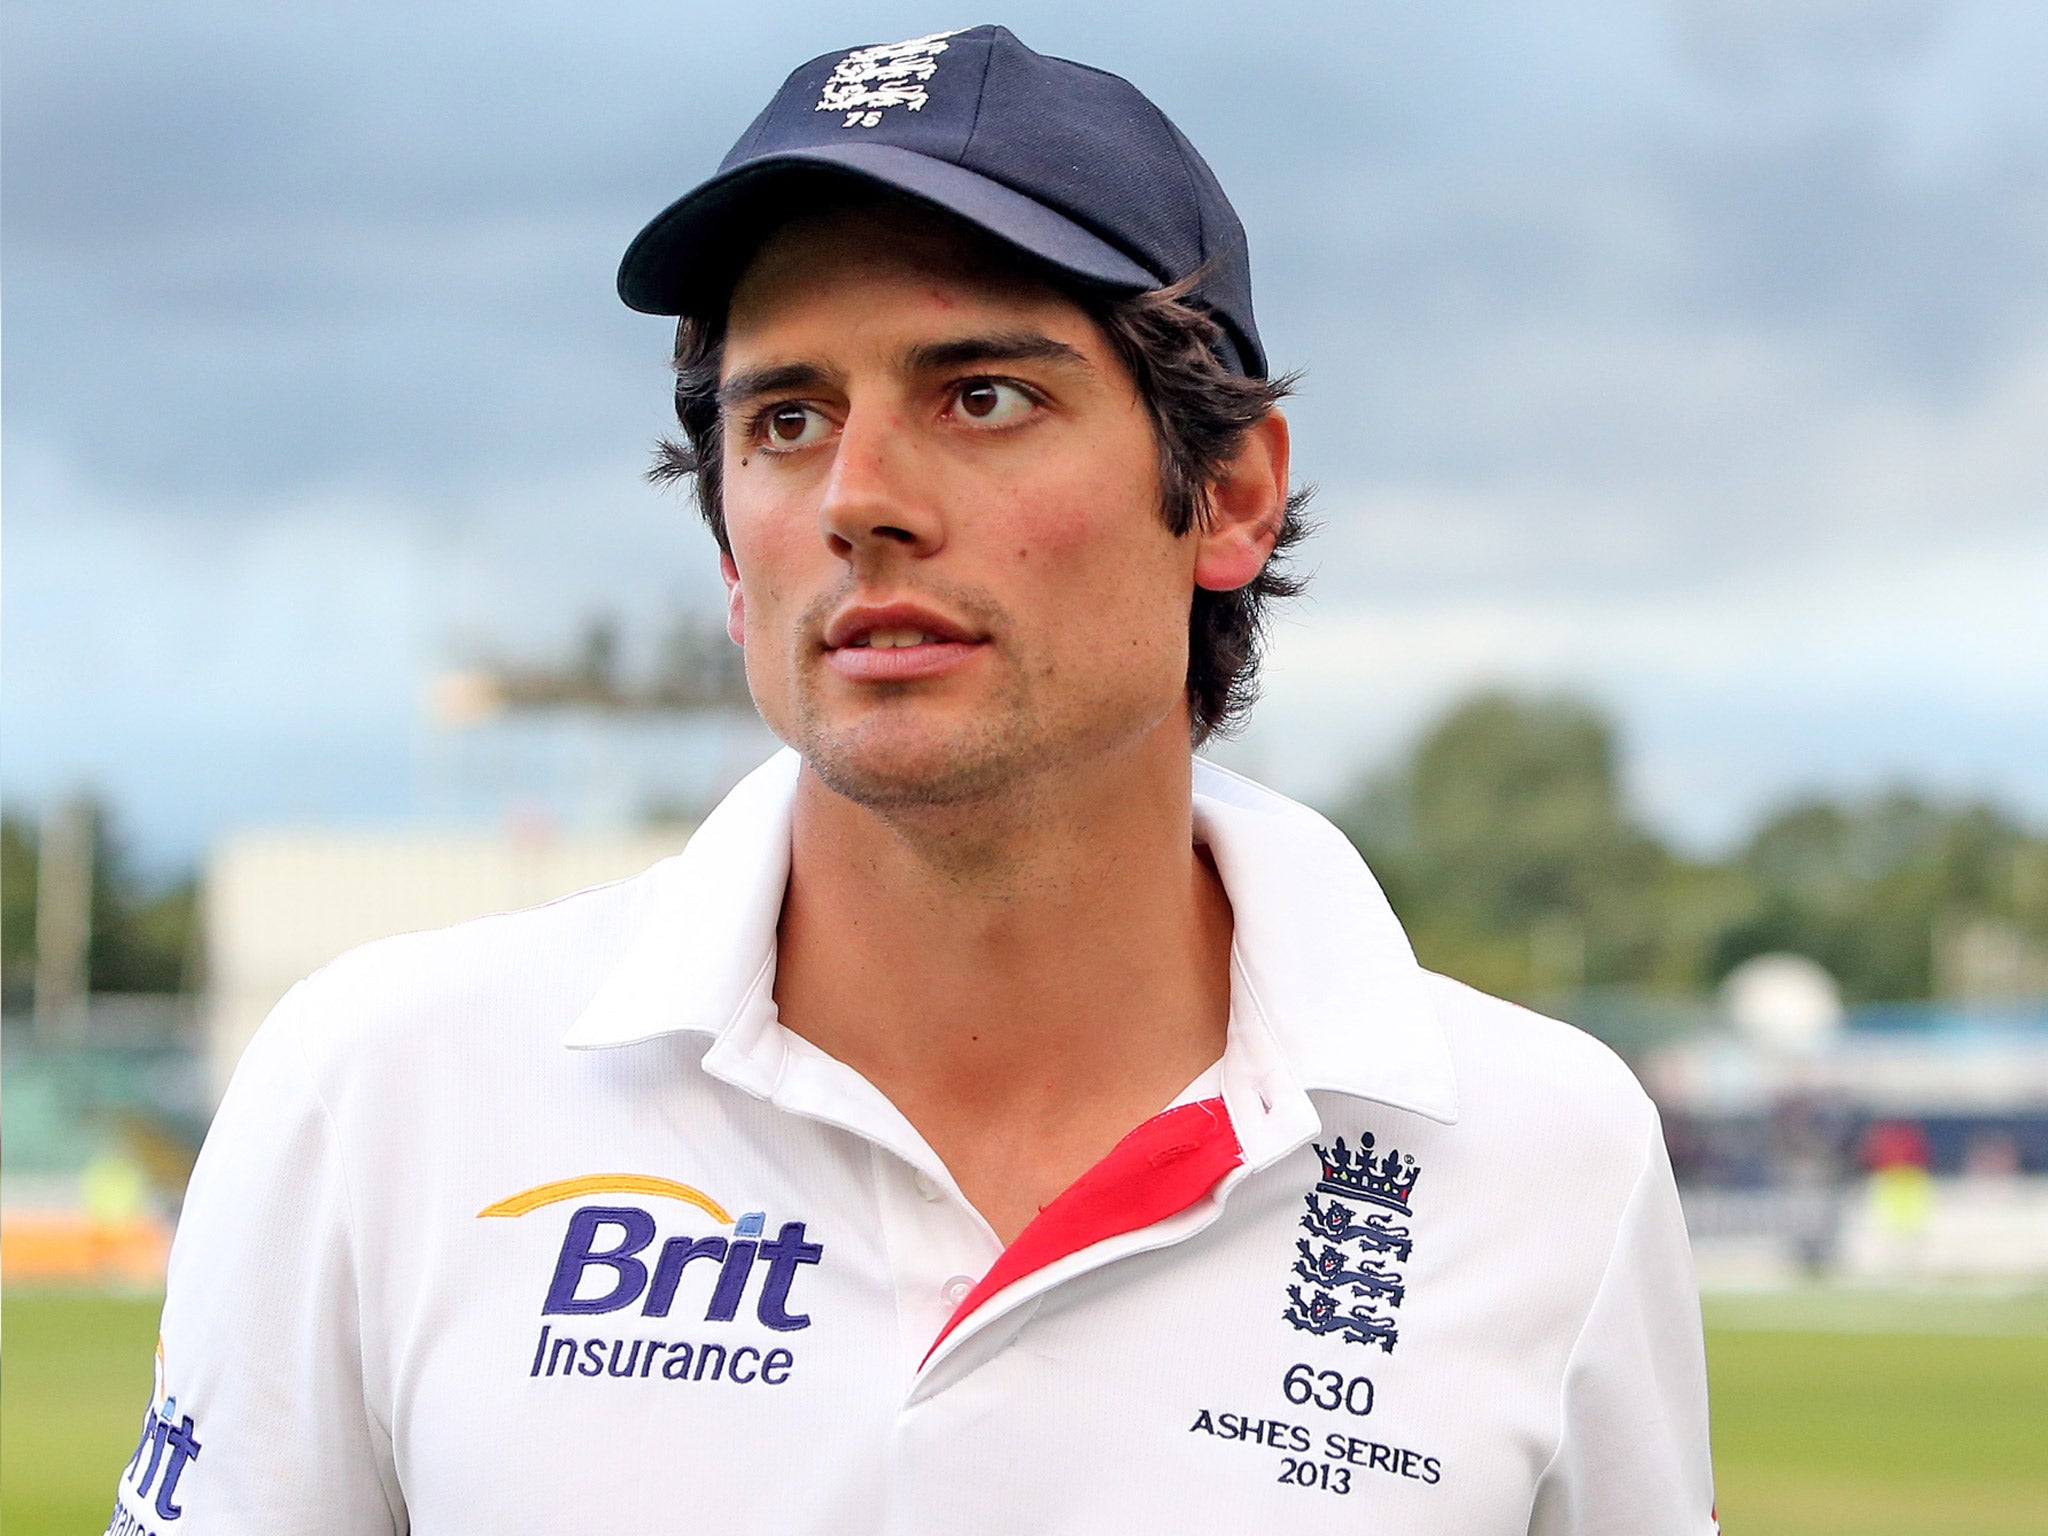 Strong and decisive leadership: Alastair Cook